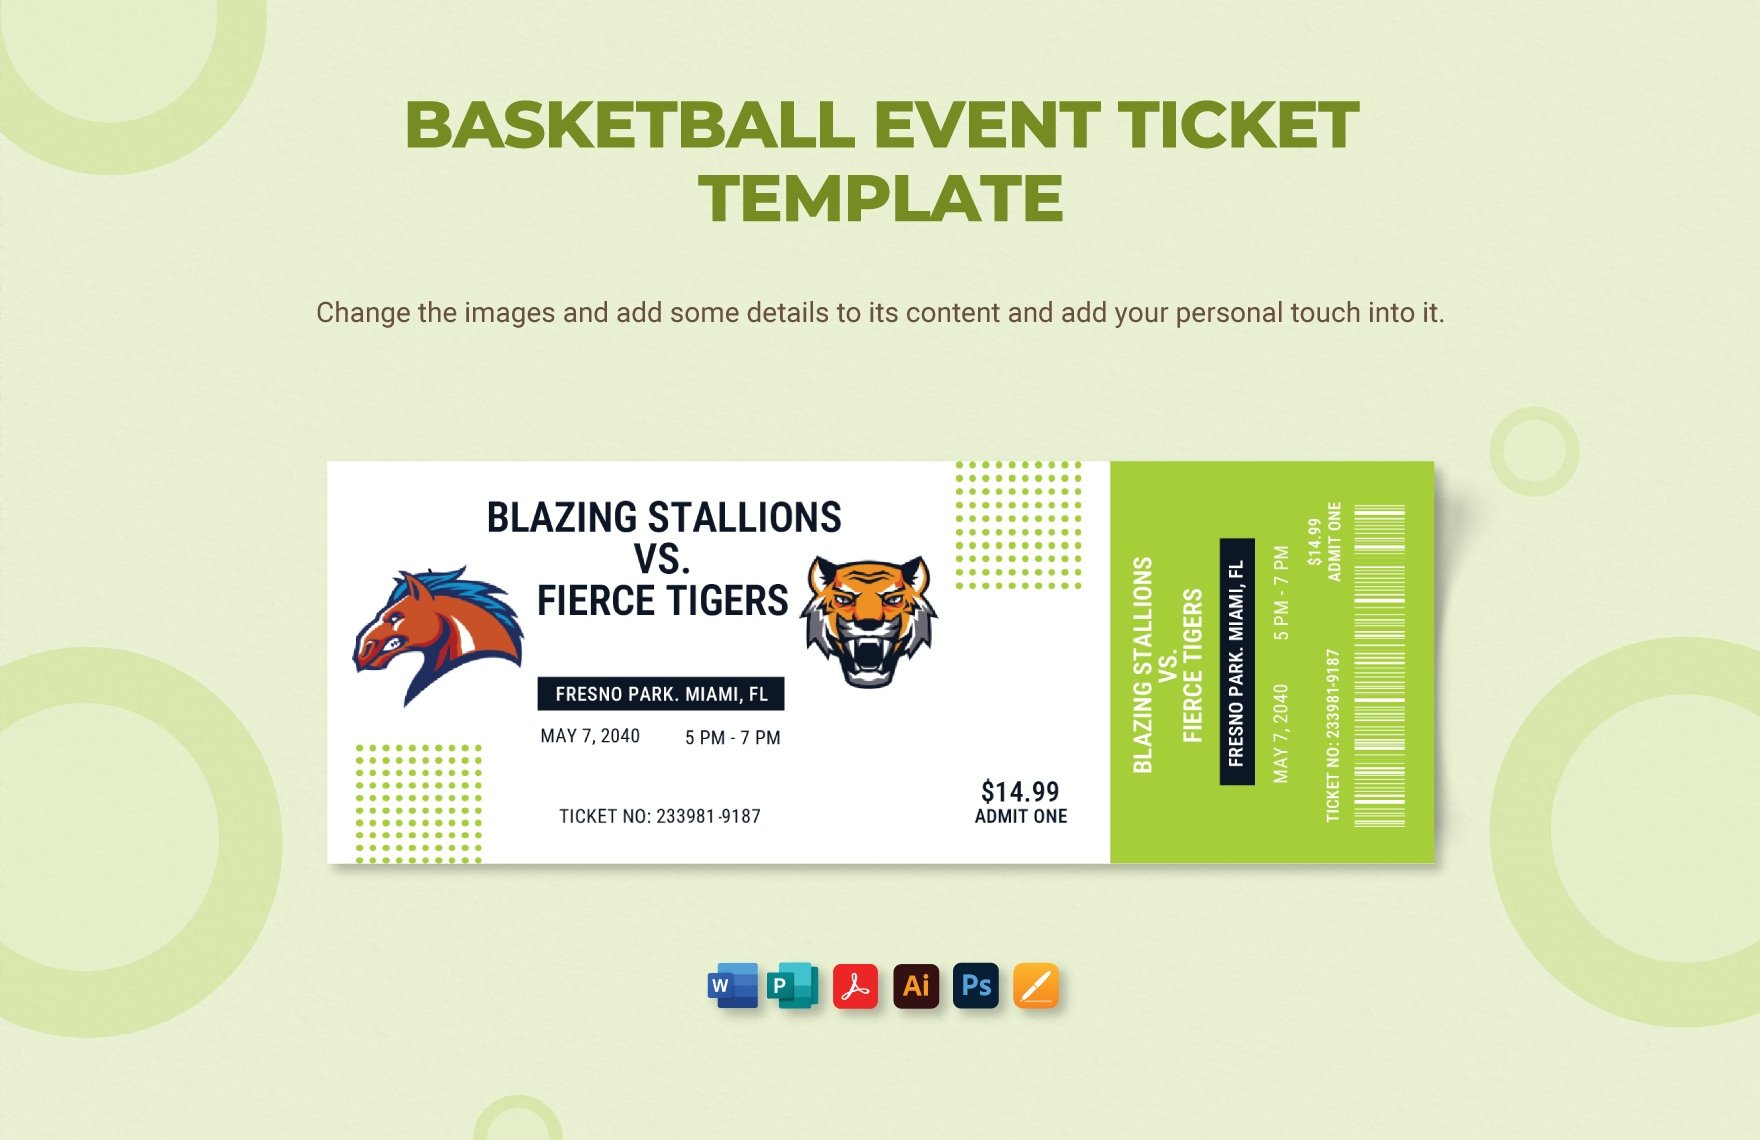 Baseball Event Ticket Template in Word, PDF, Illustrator, PSD, Apple Pages, Publisher